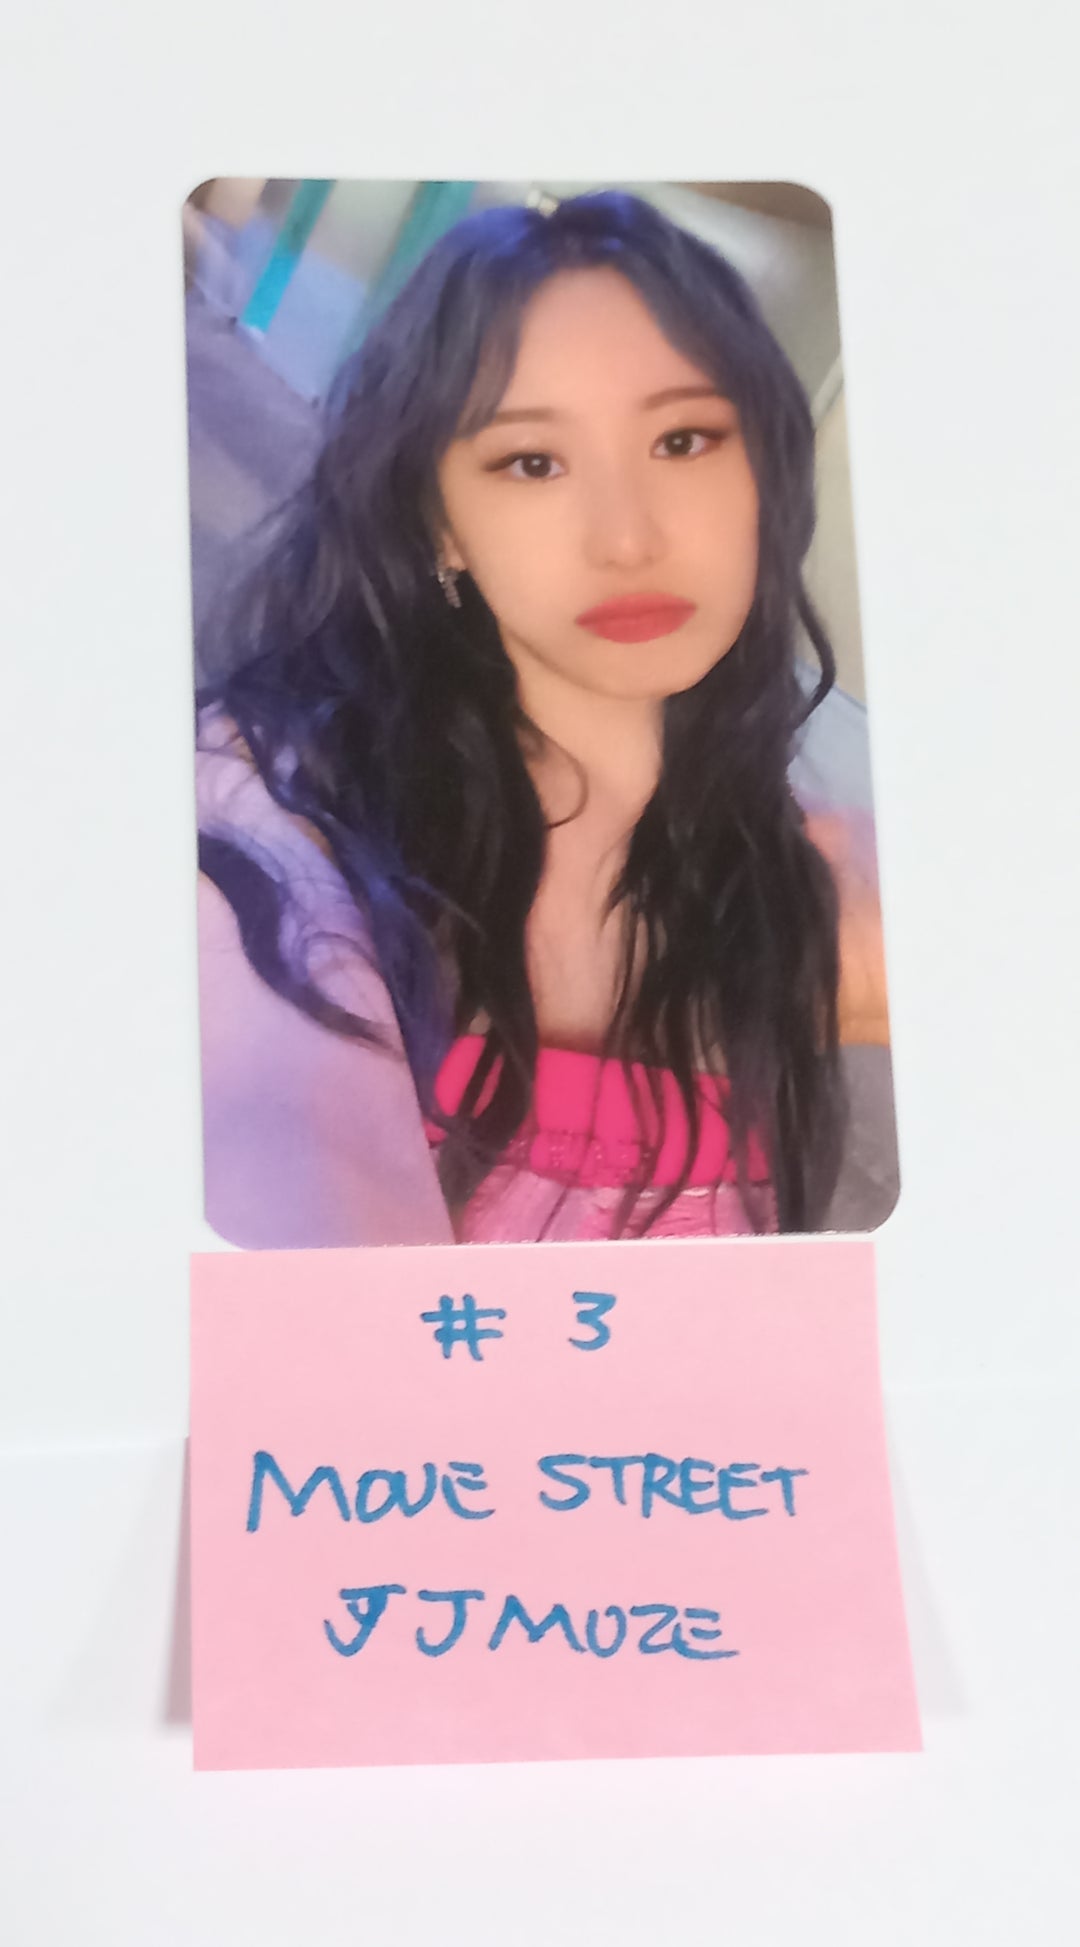 Lee Chae Yeon "The Move Street" - JJ Muze Fansign Event Photocard [Poca Ver] [23.09.21]